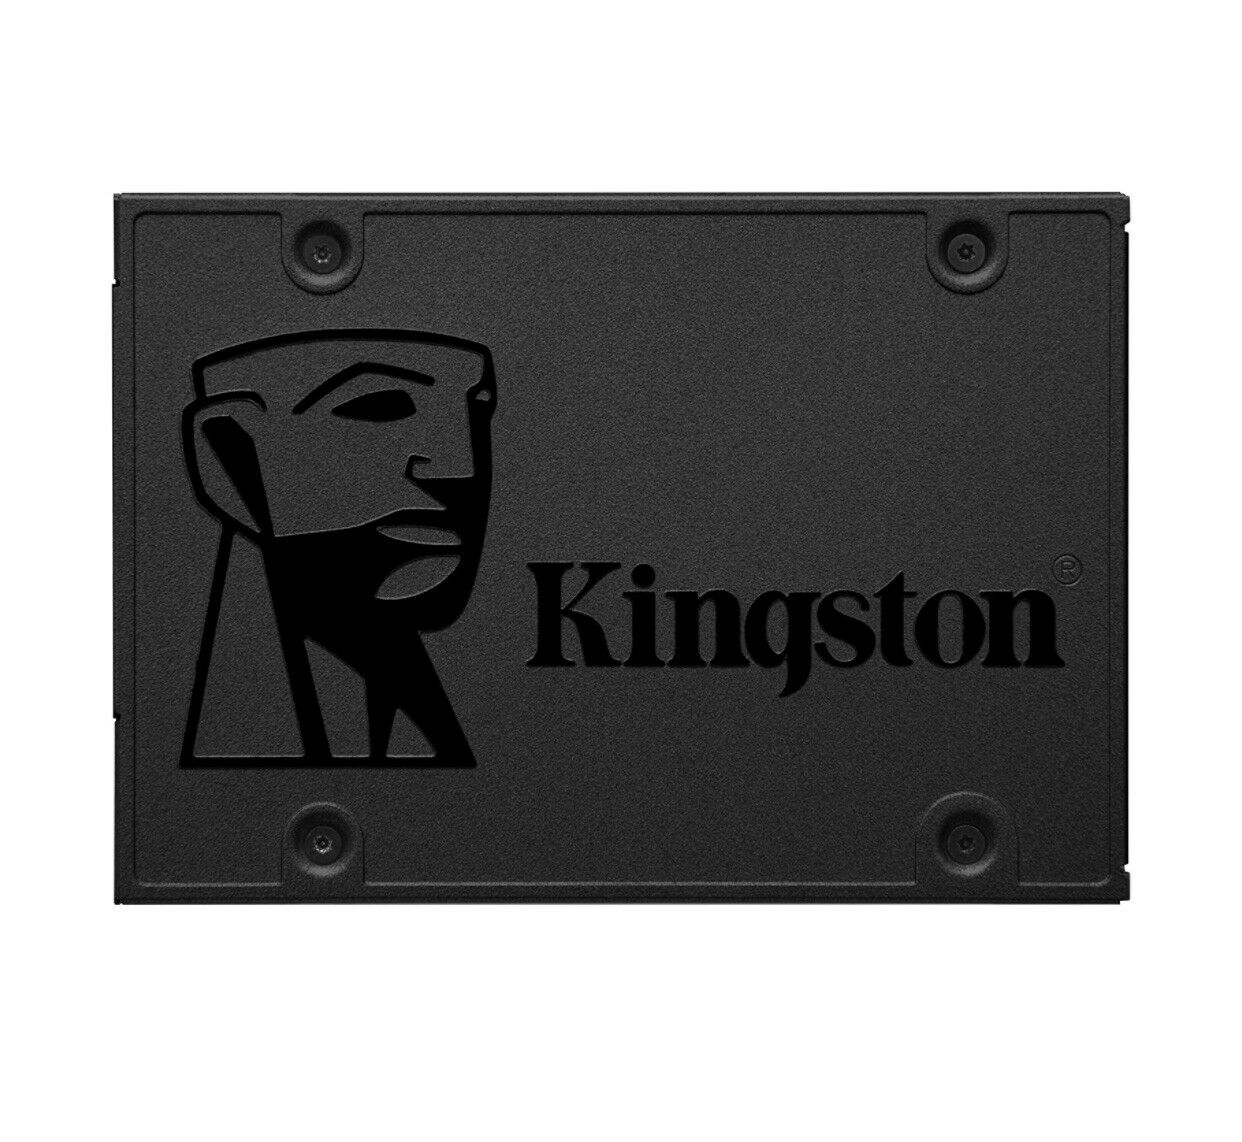 Kingstone 128GB SSD Pull out in very good condition.